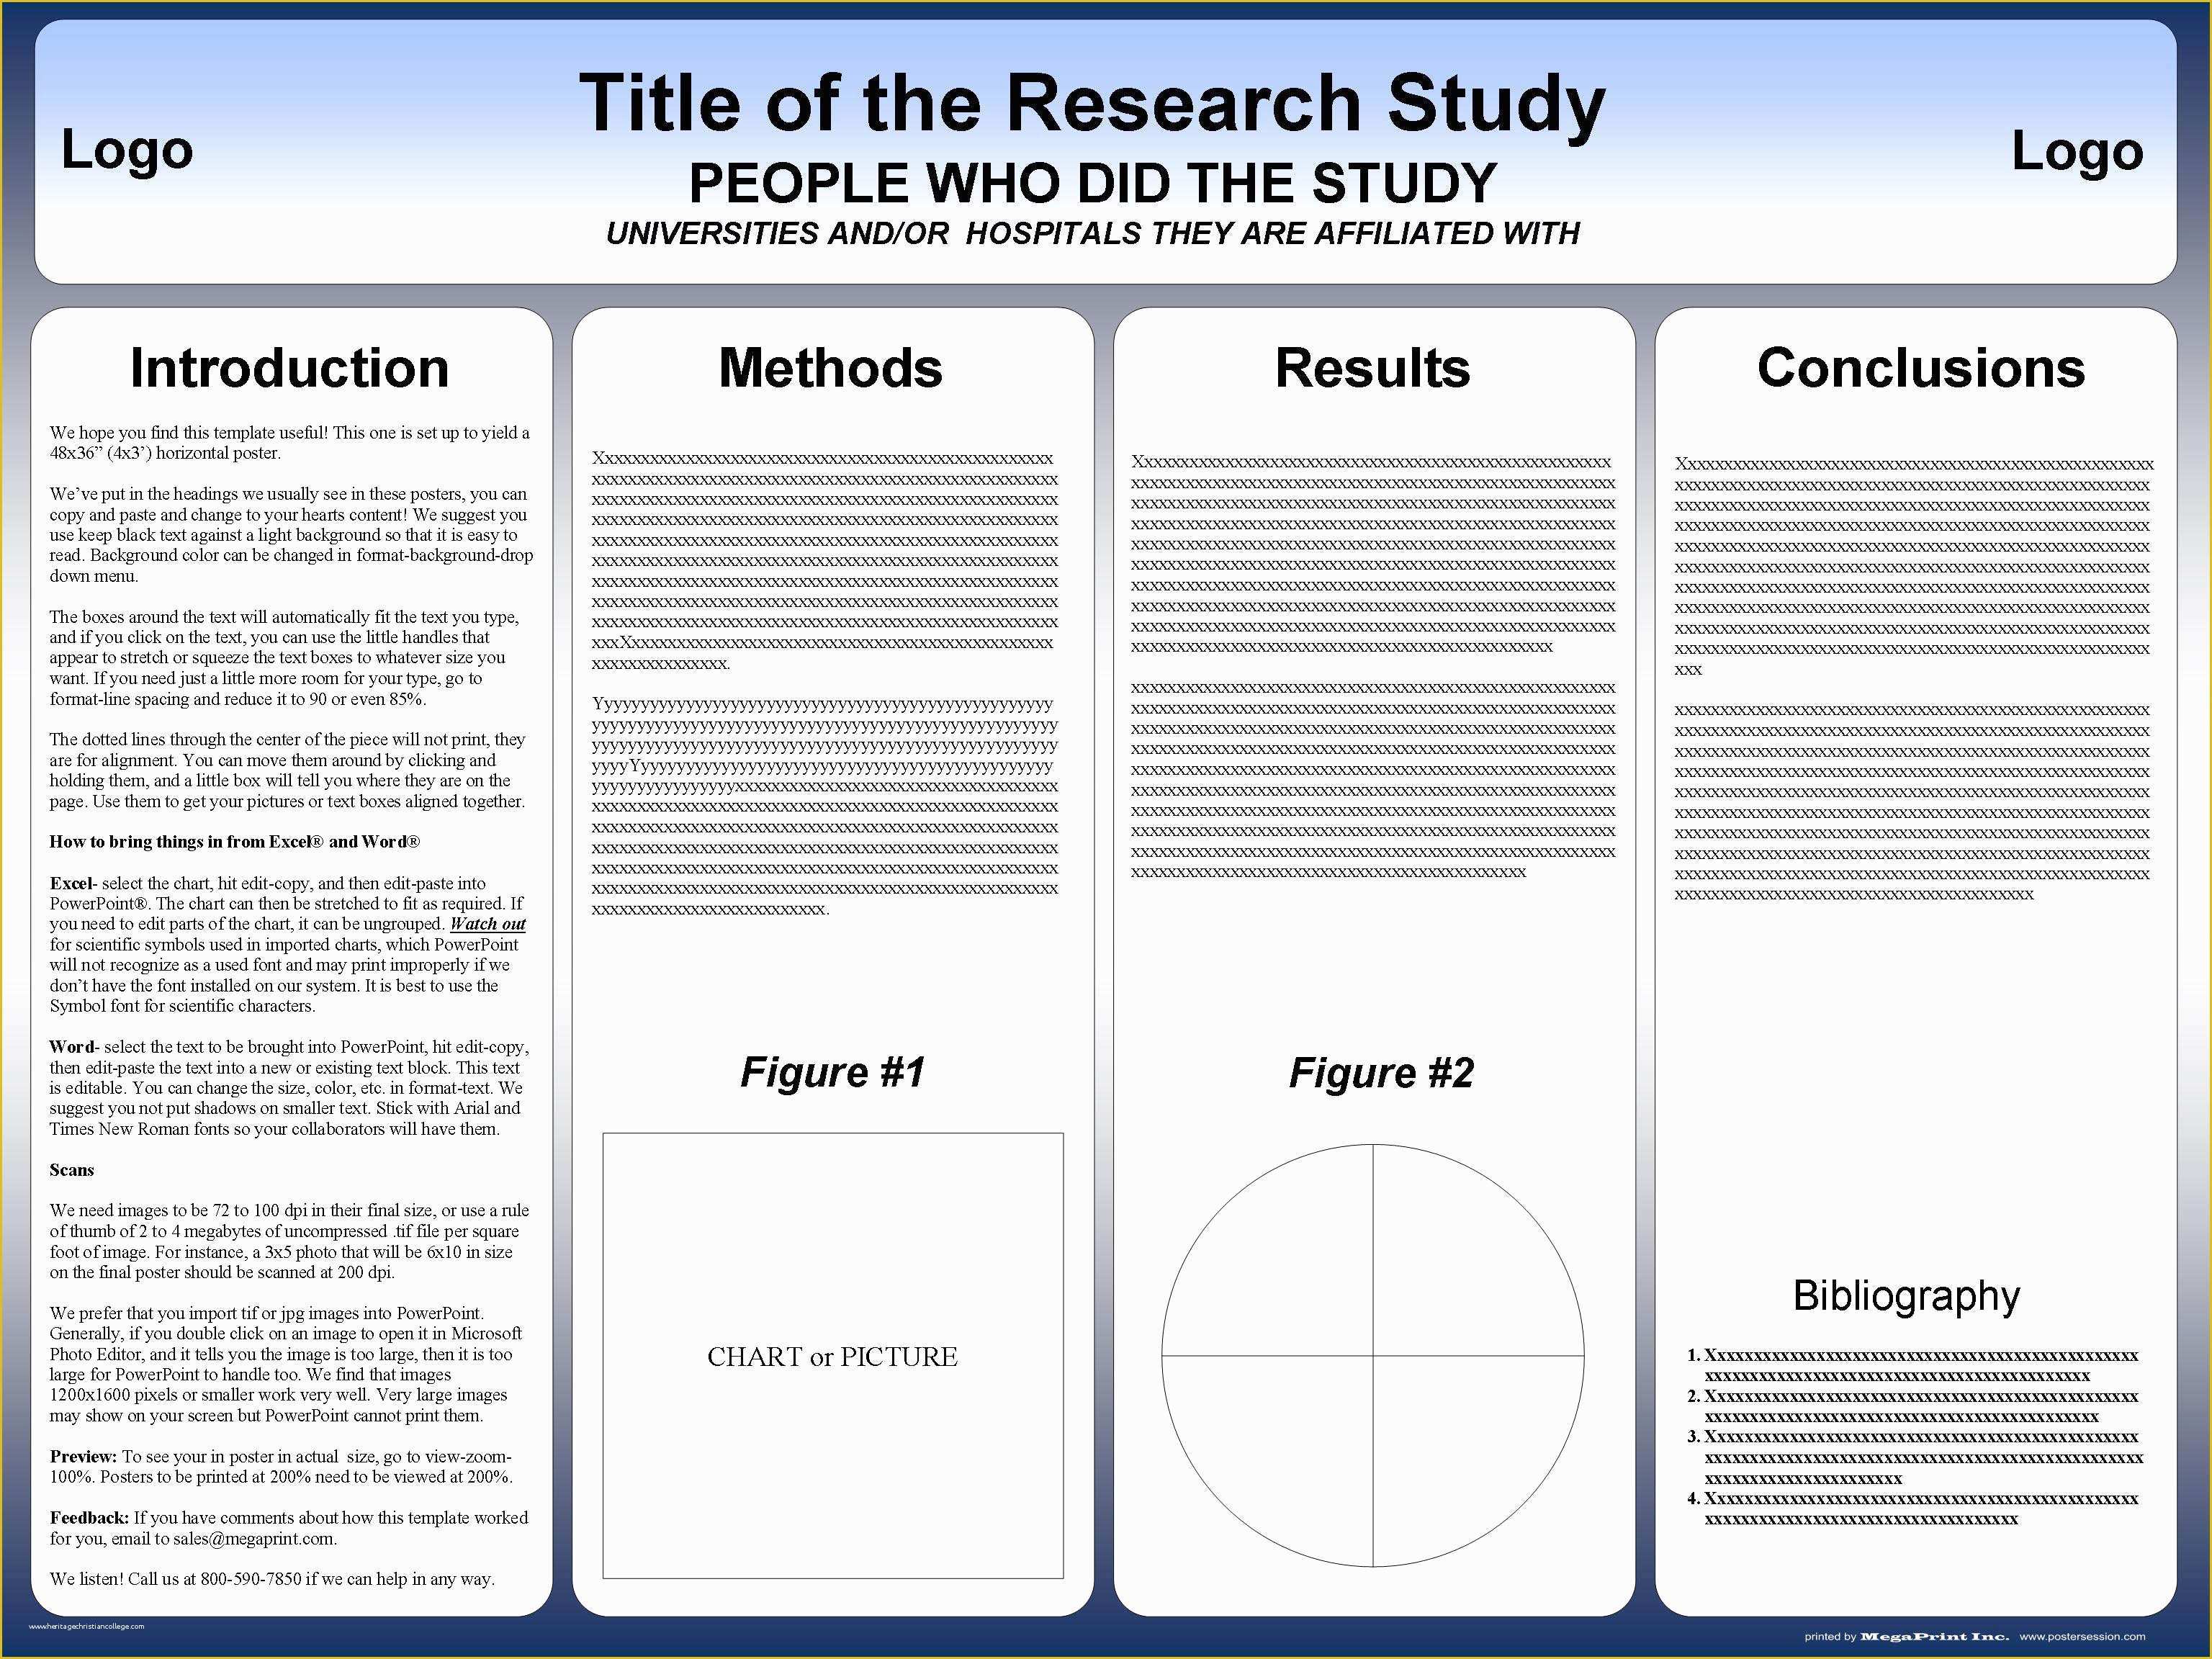 Research Poster Presentation Template Free Download Of Research Poster Templates